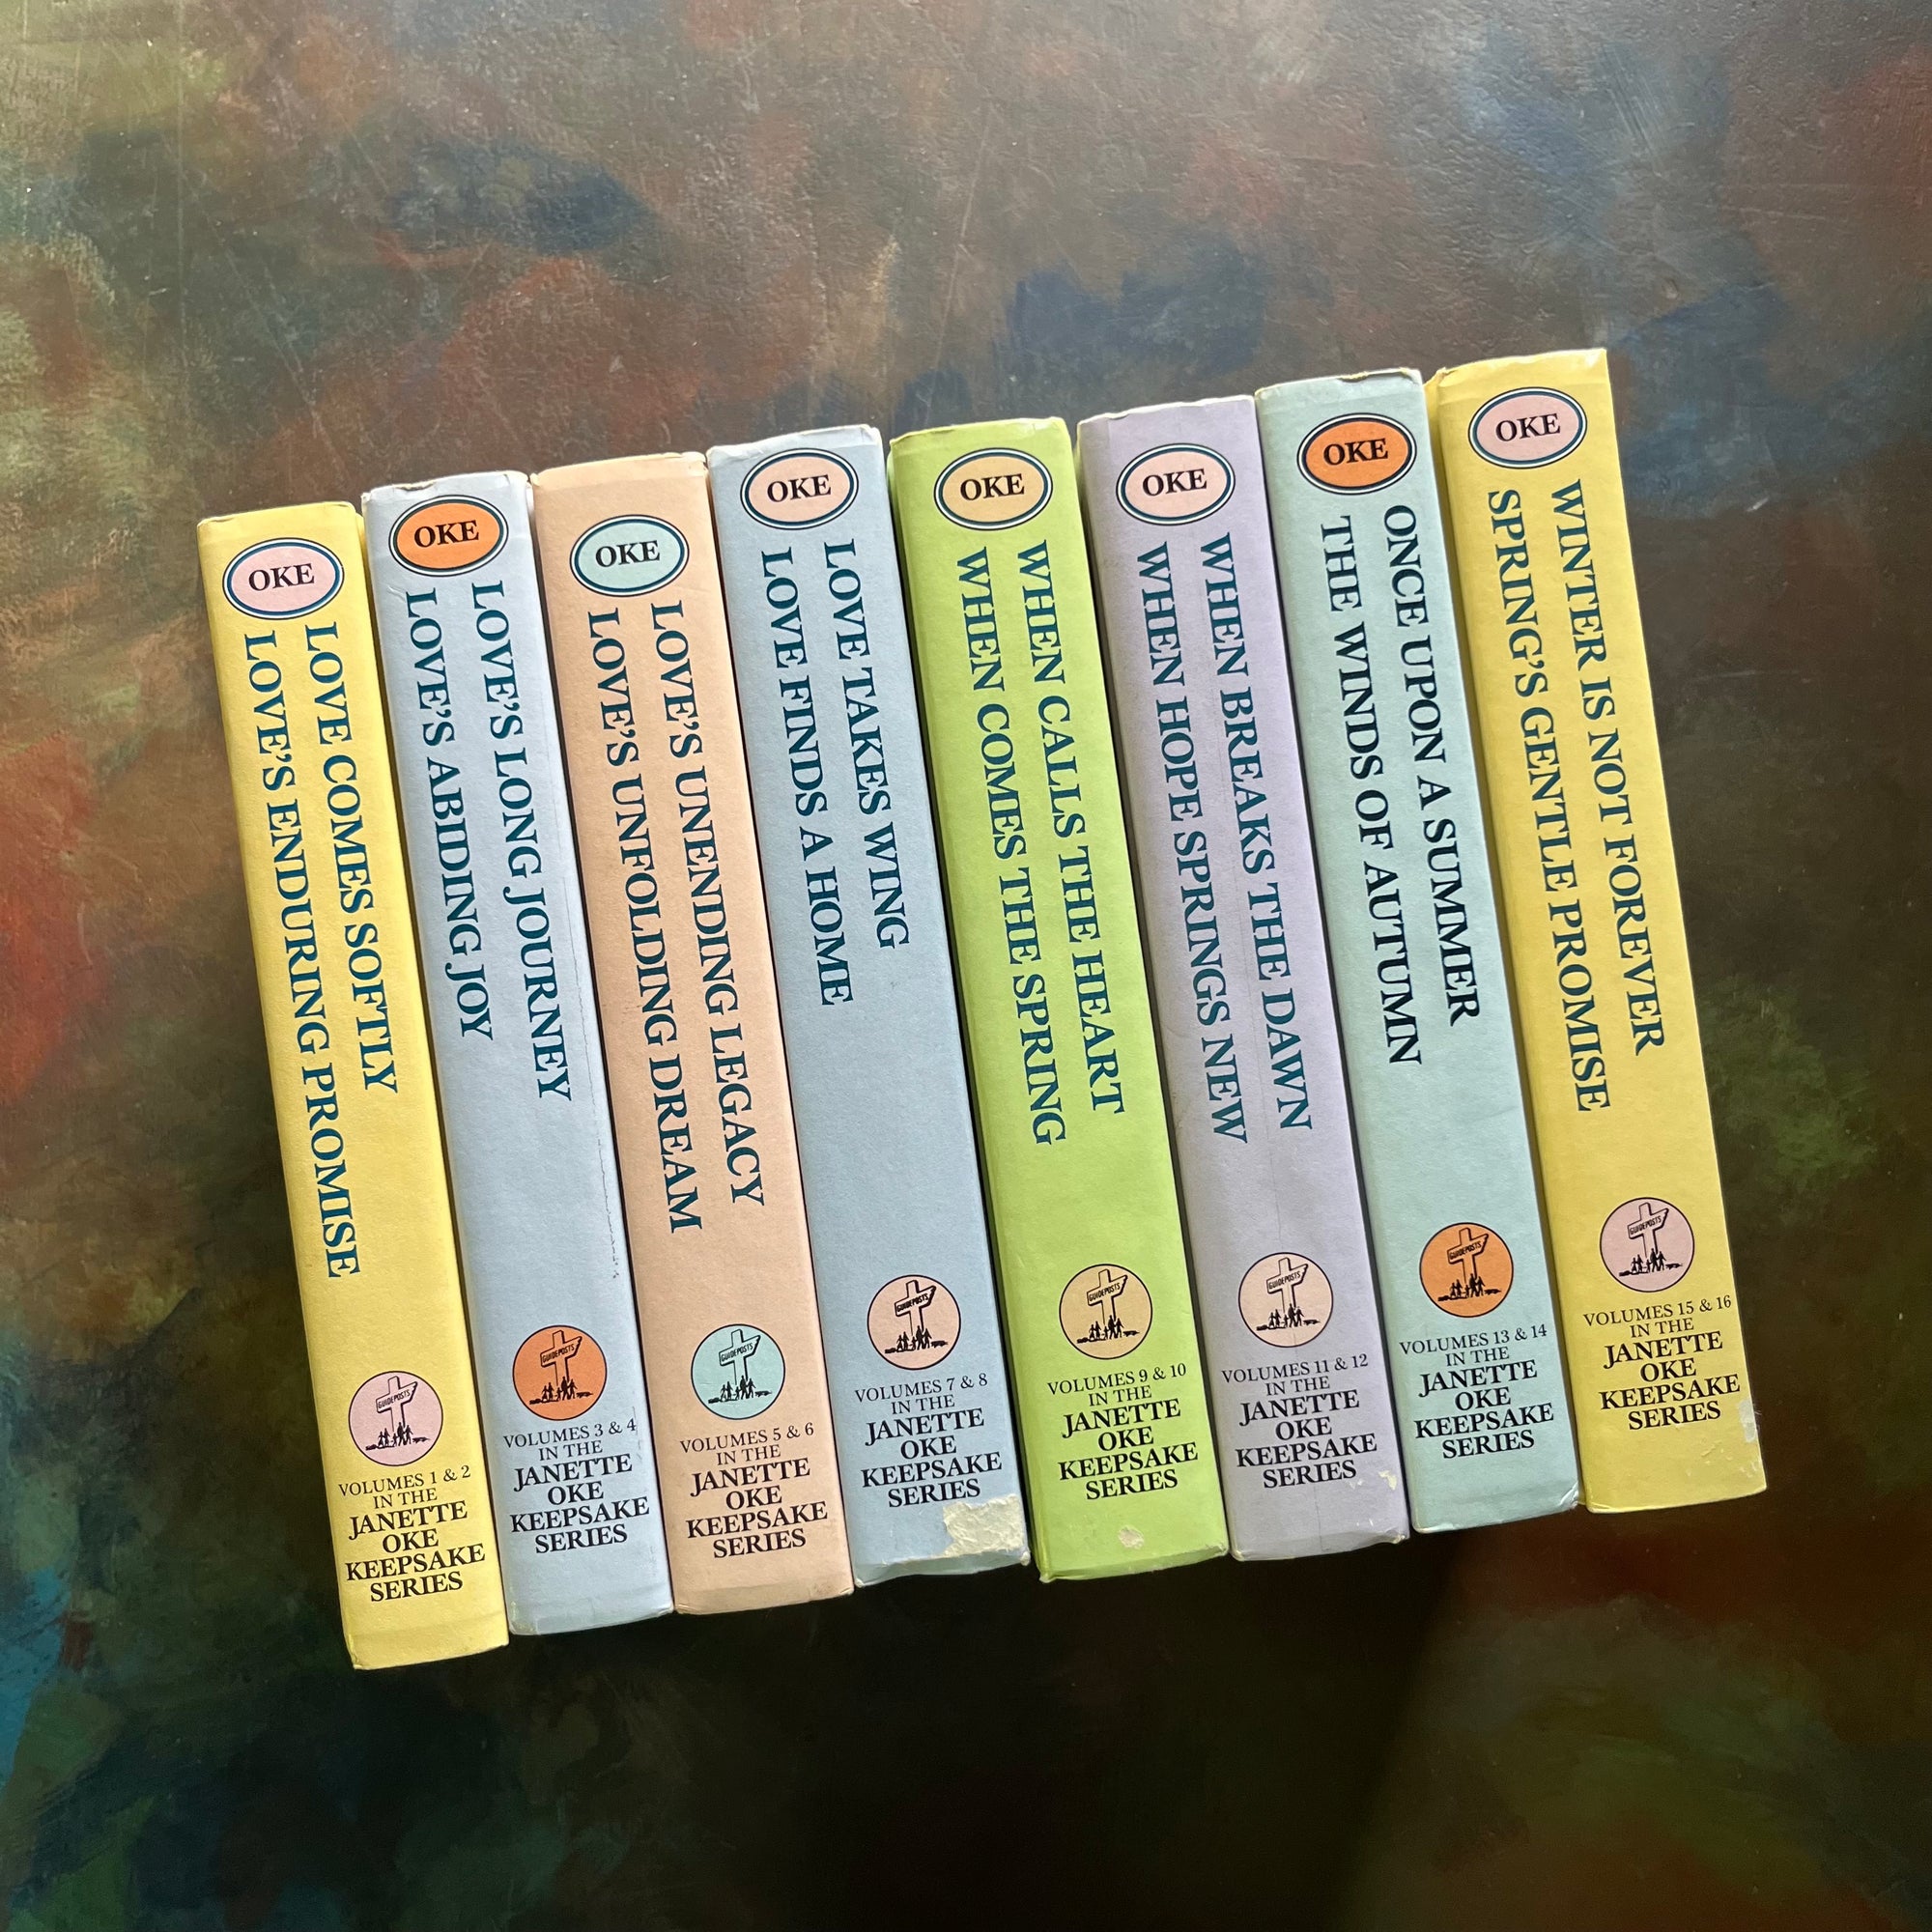 Janette Oke's Keepsake Series-complete book set-Seasons of the Heart-Canadian West-Love Comes Softly-Guideposts-vintage Christian fiction-view of the spines